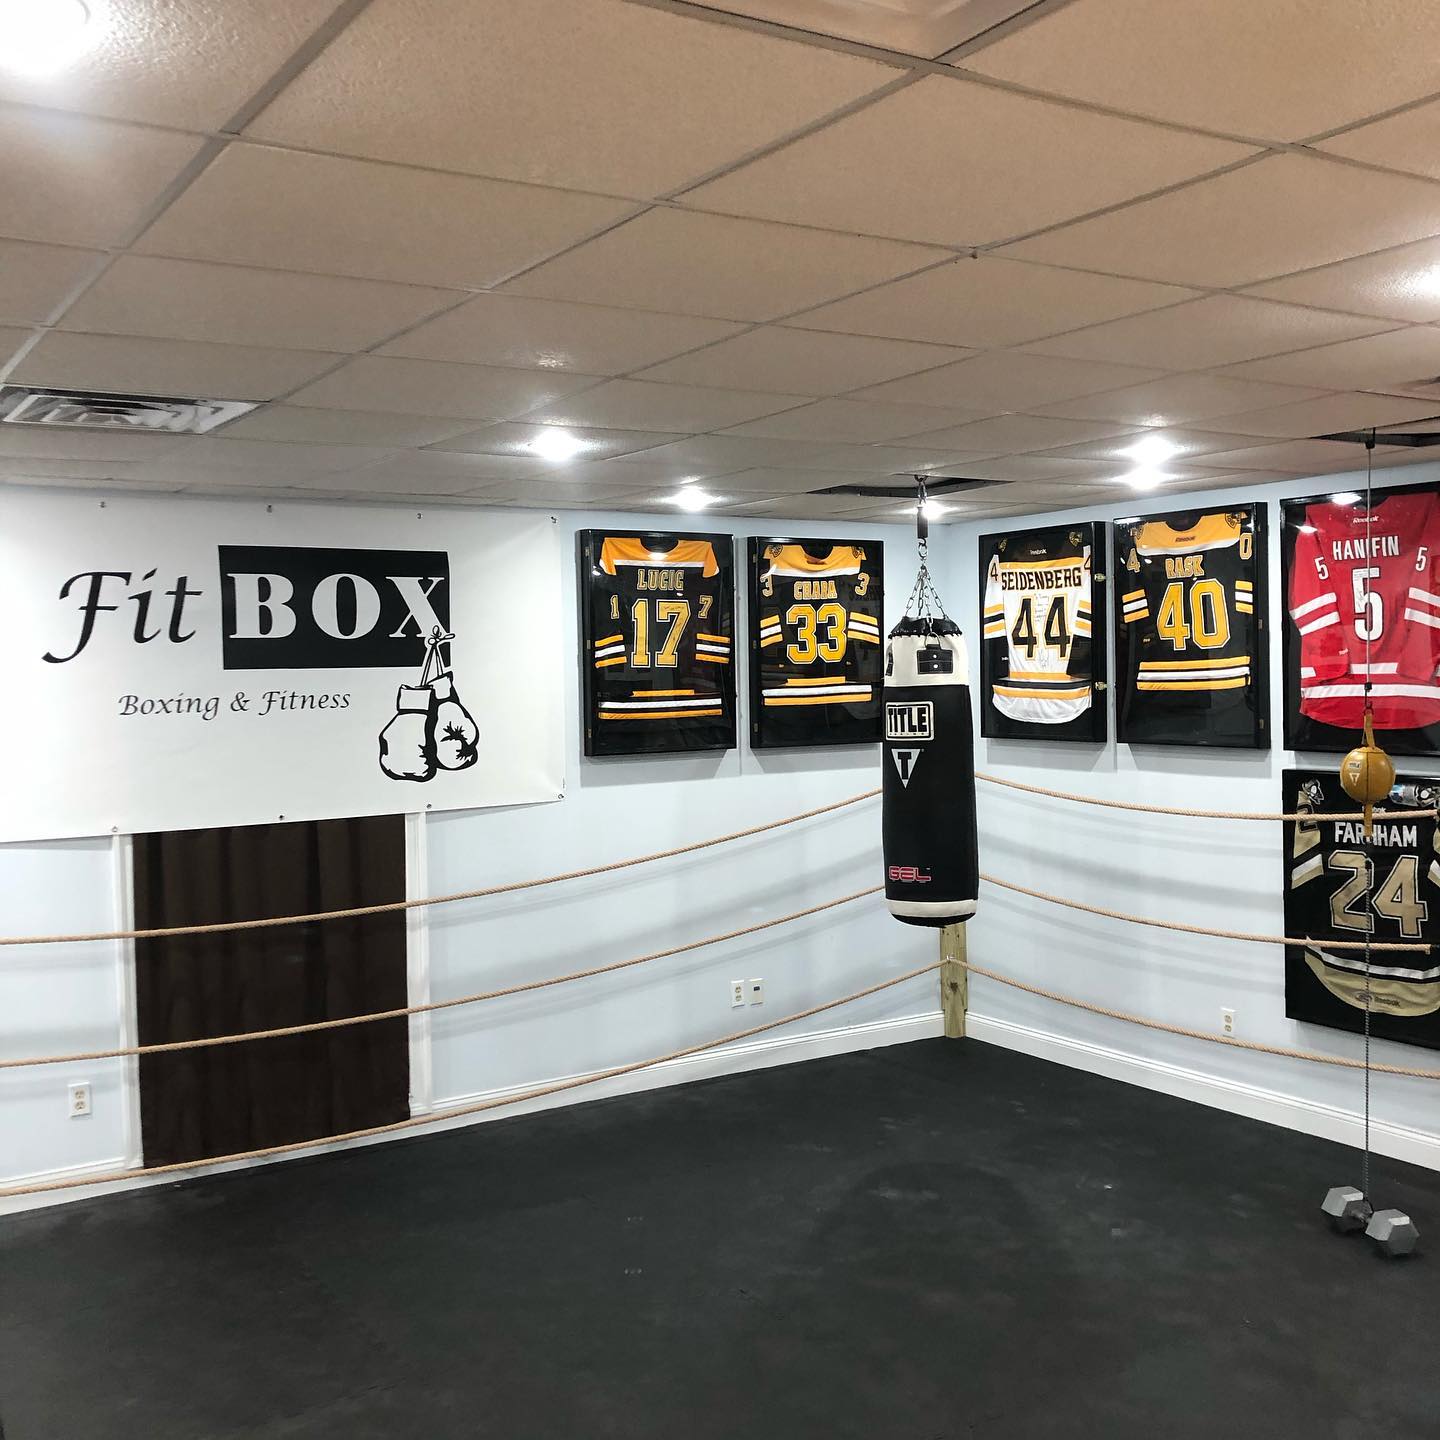 Train like the Pros off the Ice with Well-known boxing trainer @tommymcinerney . With the Ice Rinks closed for a few weeks Contact us to learn more on how we can keep young athletes conditioning up ,focus on hand-eye skills and better their footwork. . For a free session contact us at , call/text (781)727-9503 or email FitBOX@outlook.com 
.